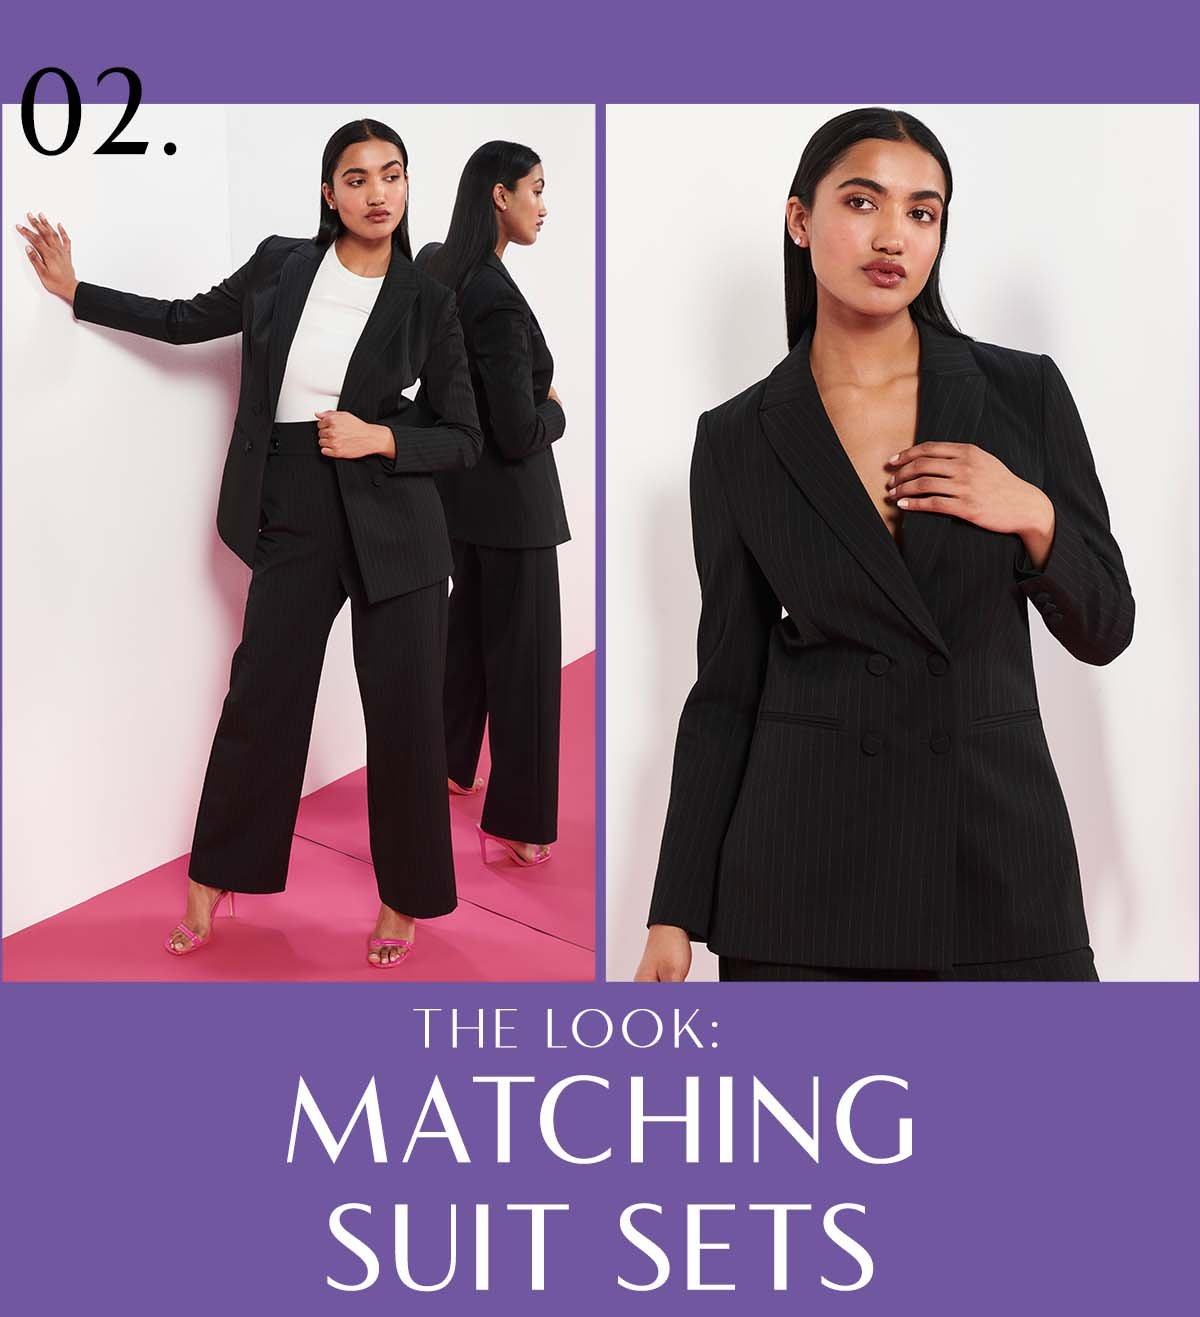 The Look: Matching Sets